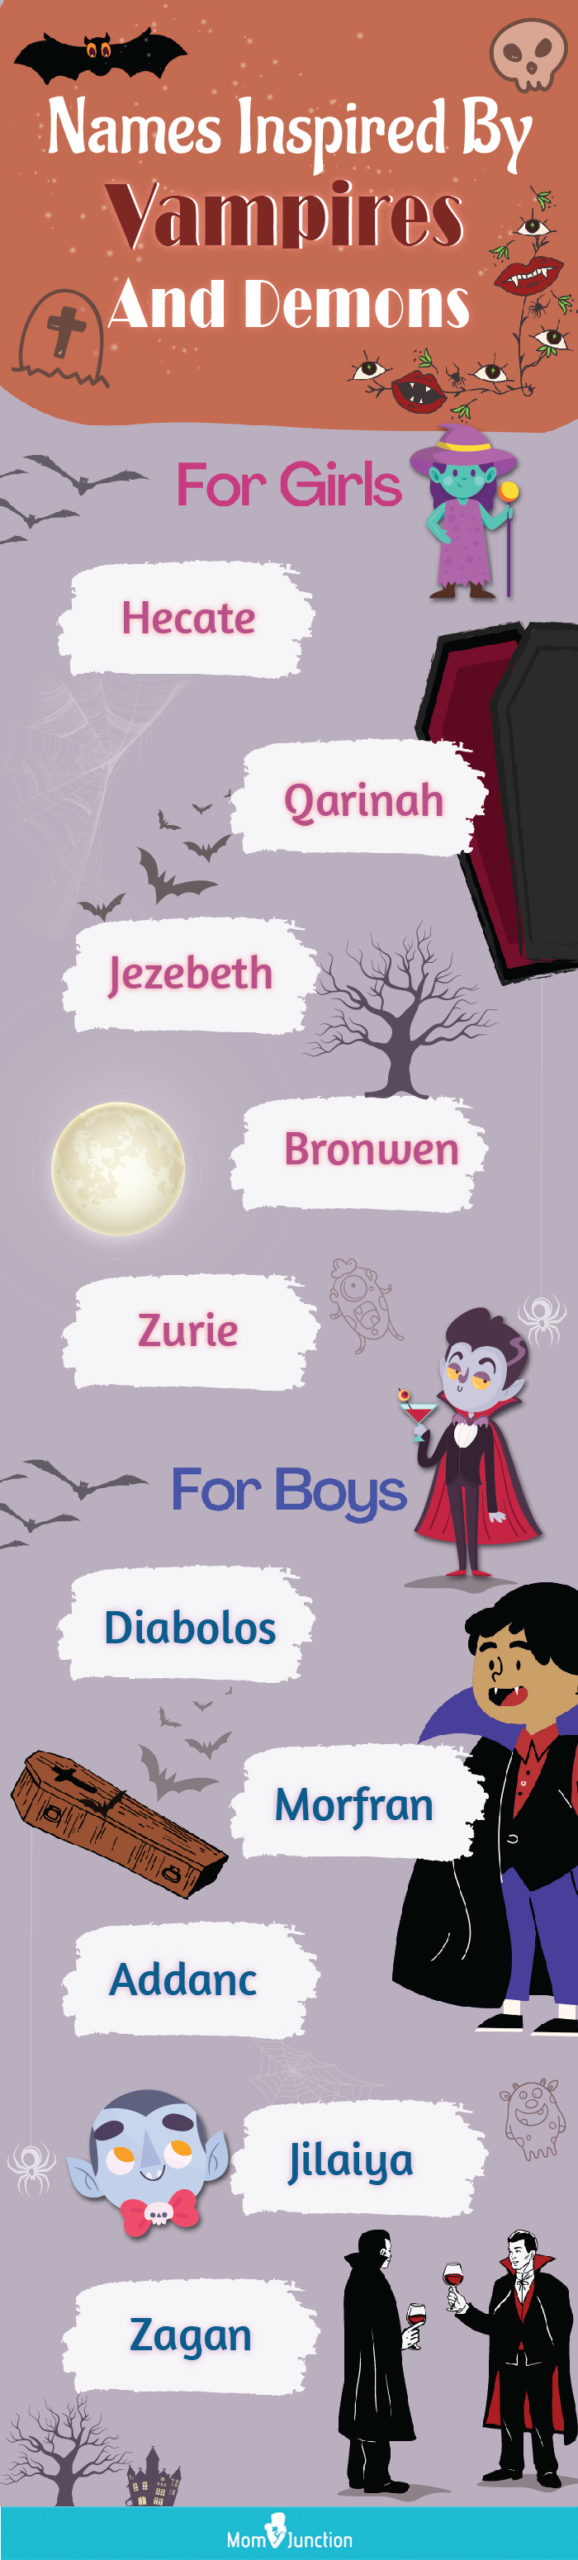 names inspired by vampires and demon (infographic)